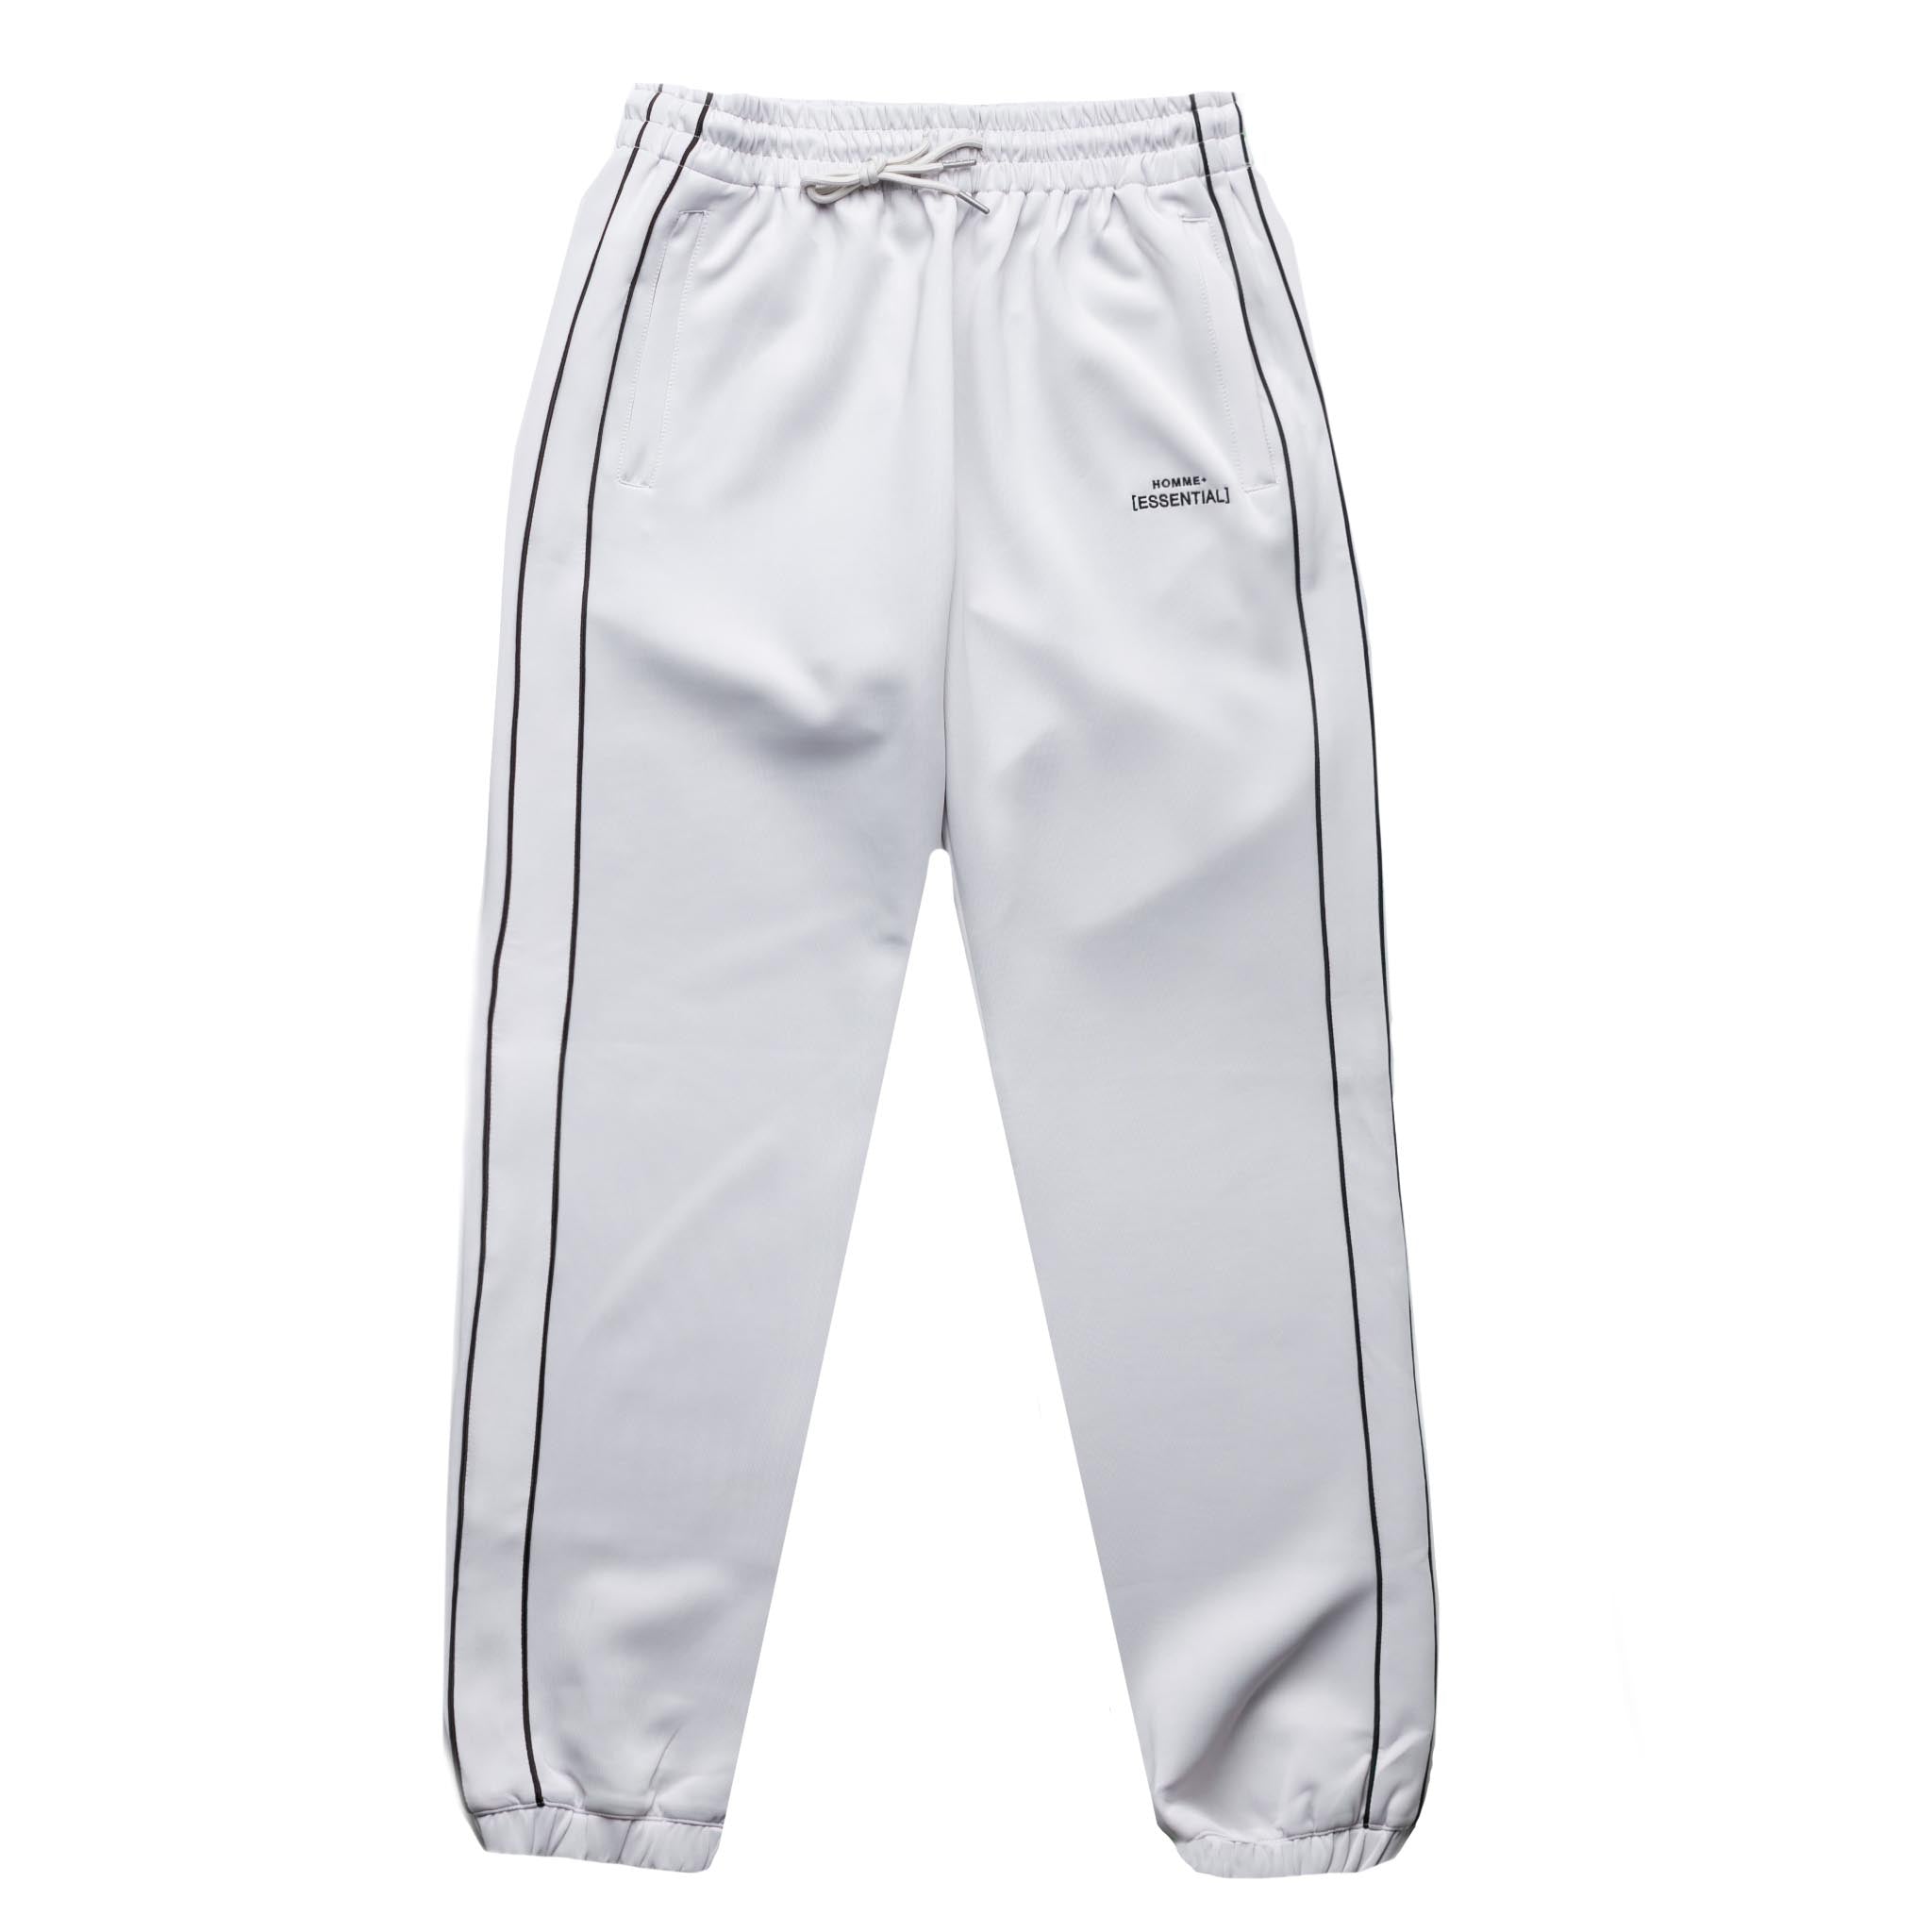 HOMME+ 'ESSENTIAL' Trackpants Cement